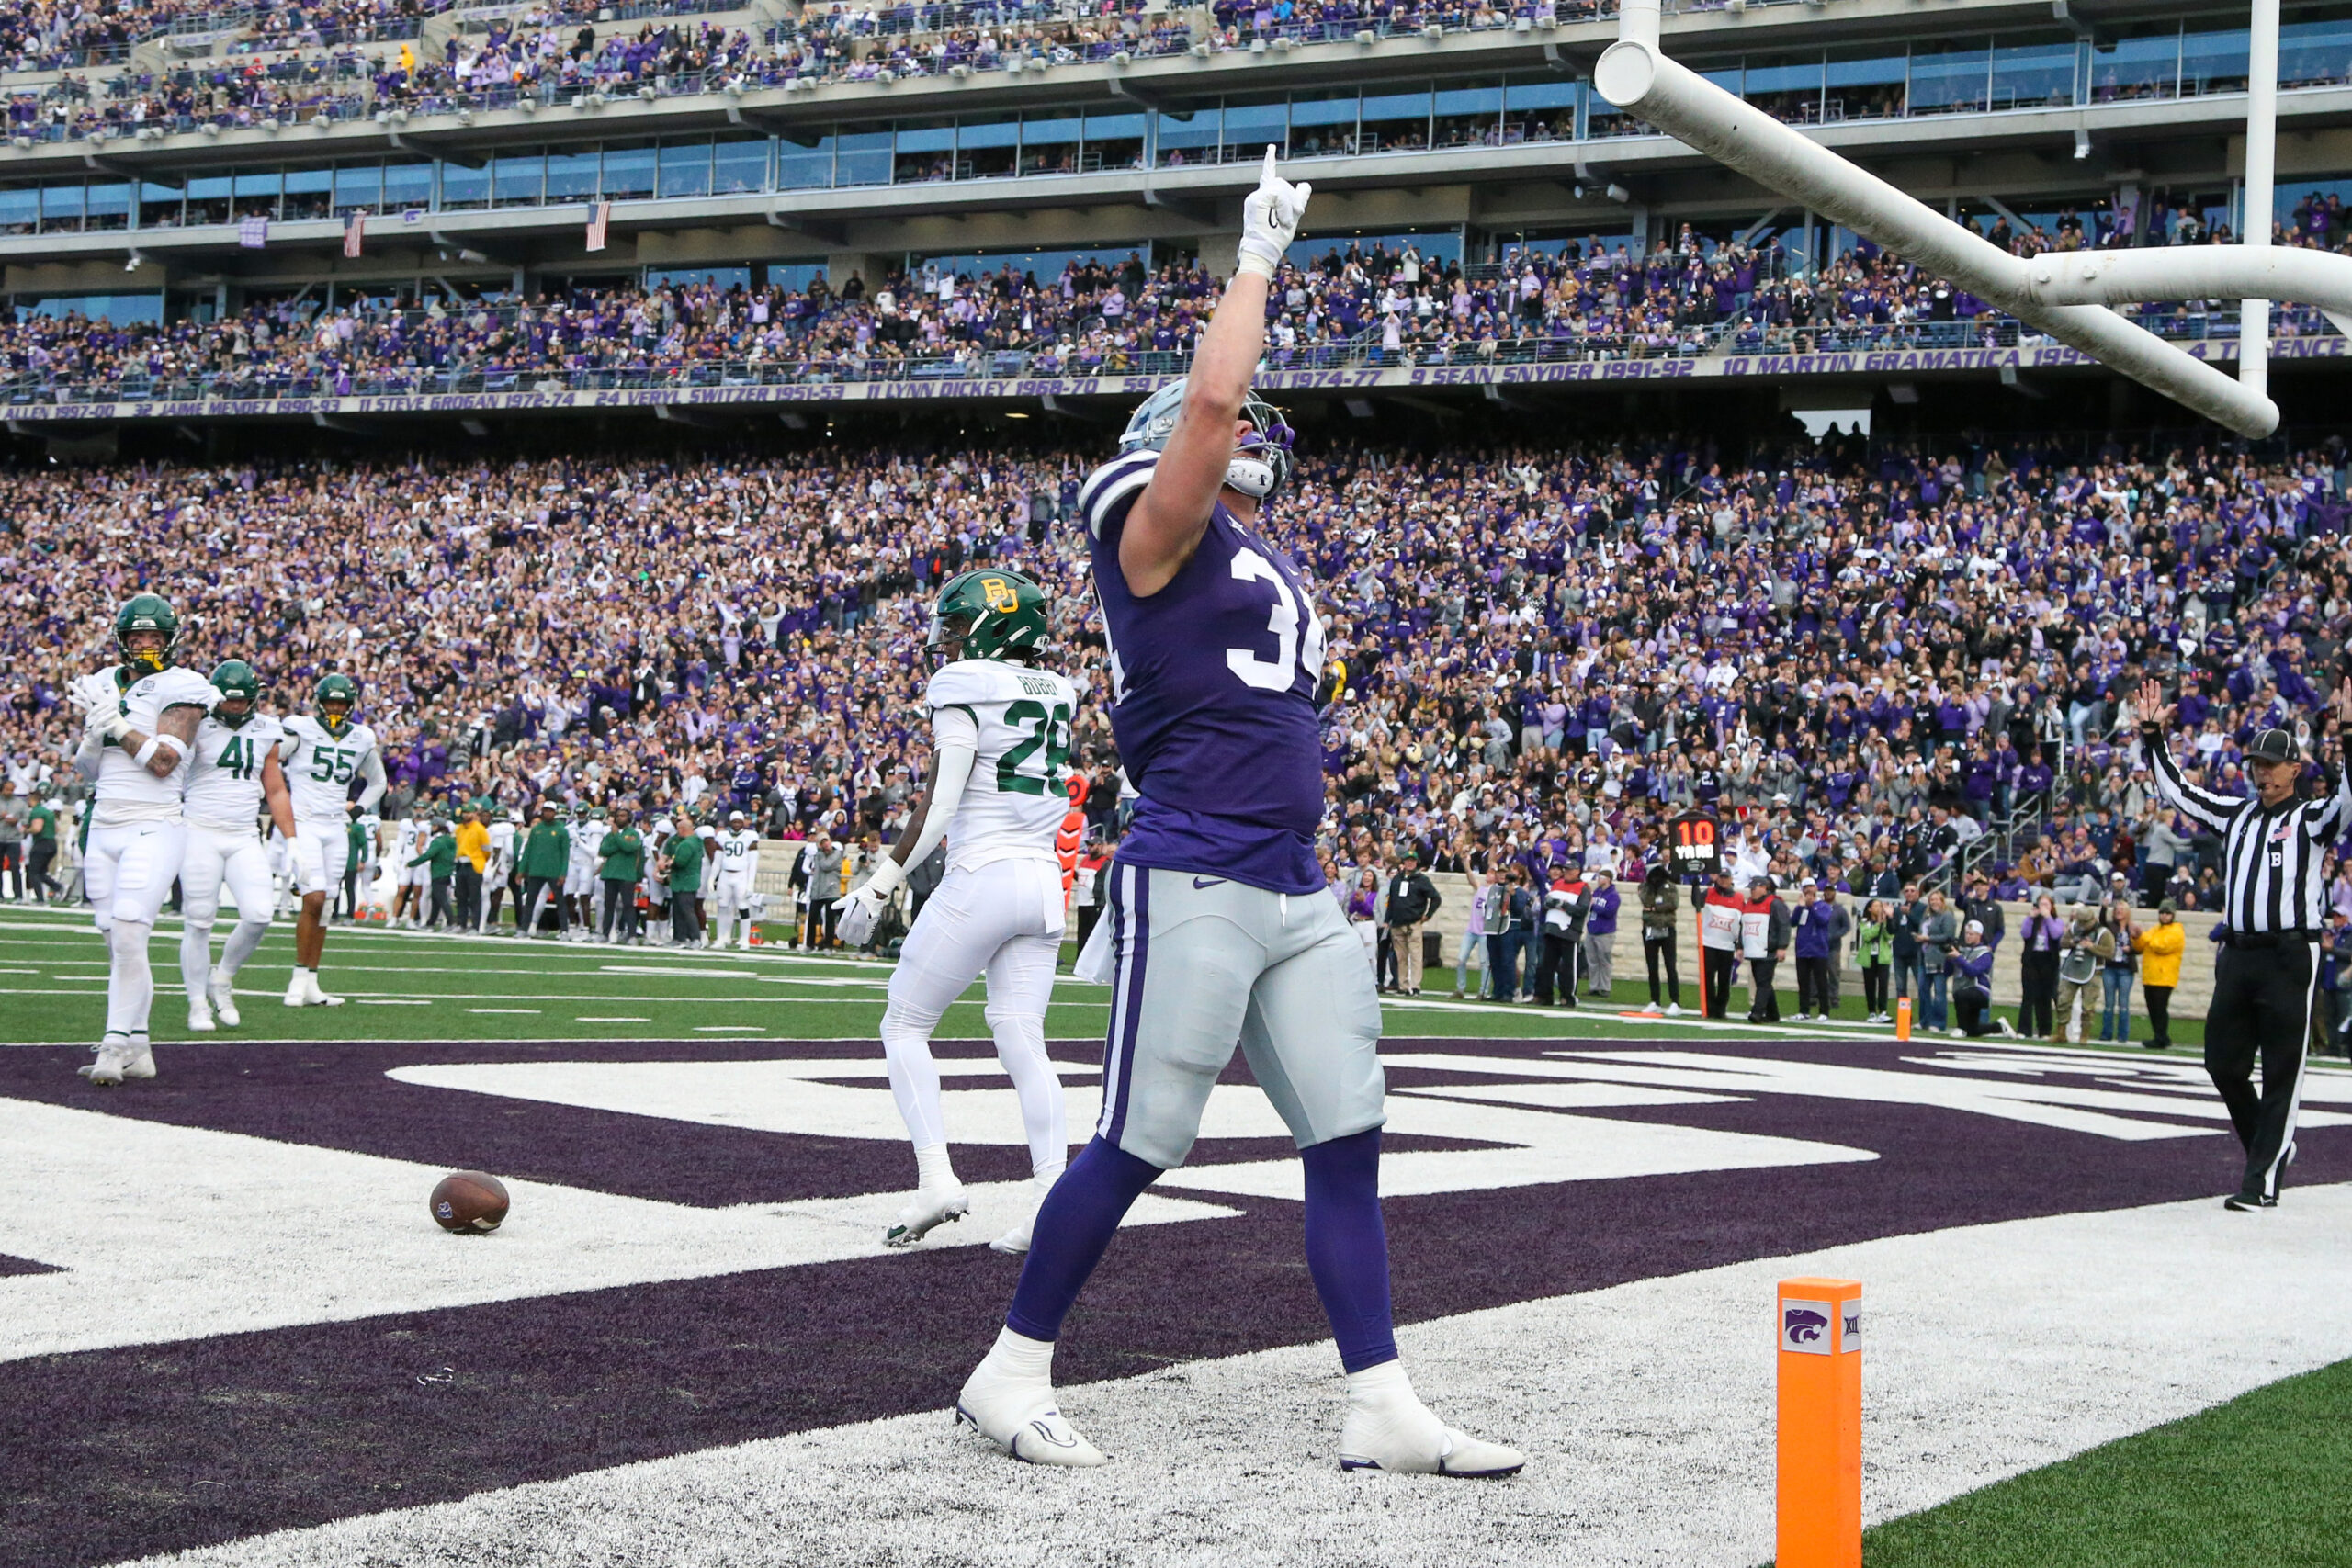 Kansas State Wildcats tight end Ben Sinnott (34) celebrates a touchdown catch during the second quarter against the Baylor Bears at Bill Snyder Family Football Stadium.